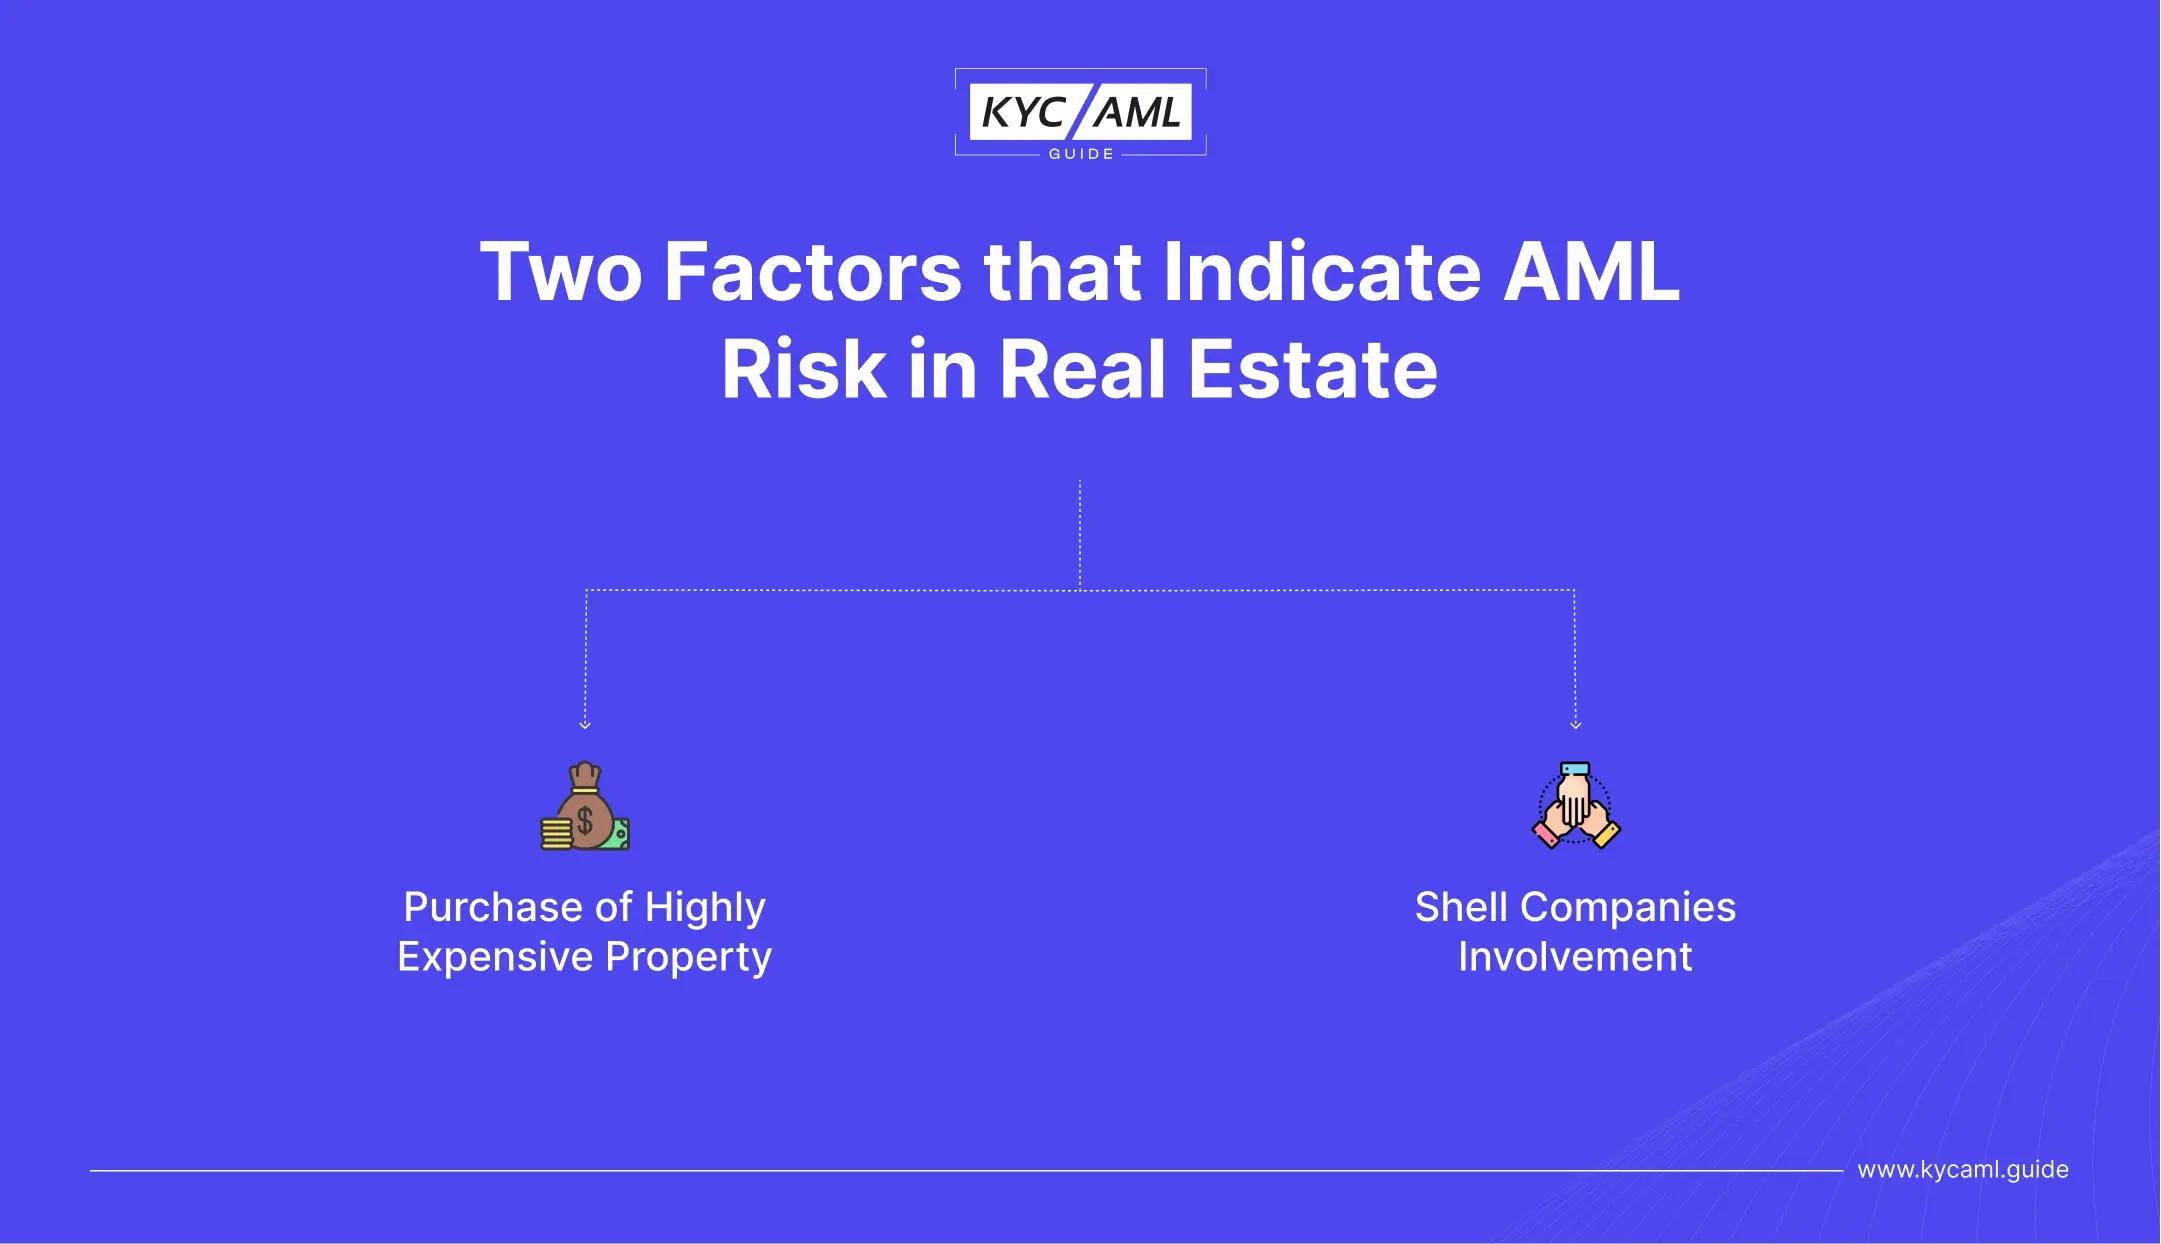 Challenges faced by real estate in AML Implementation